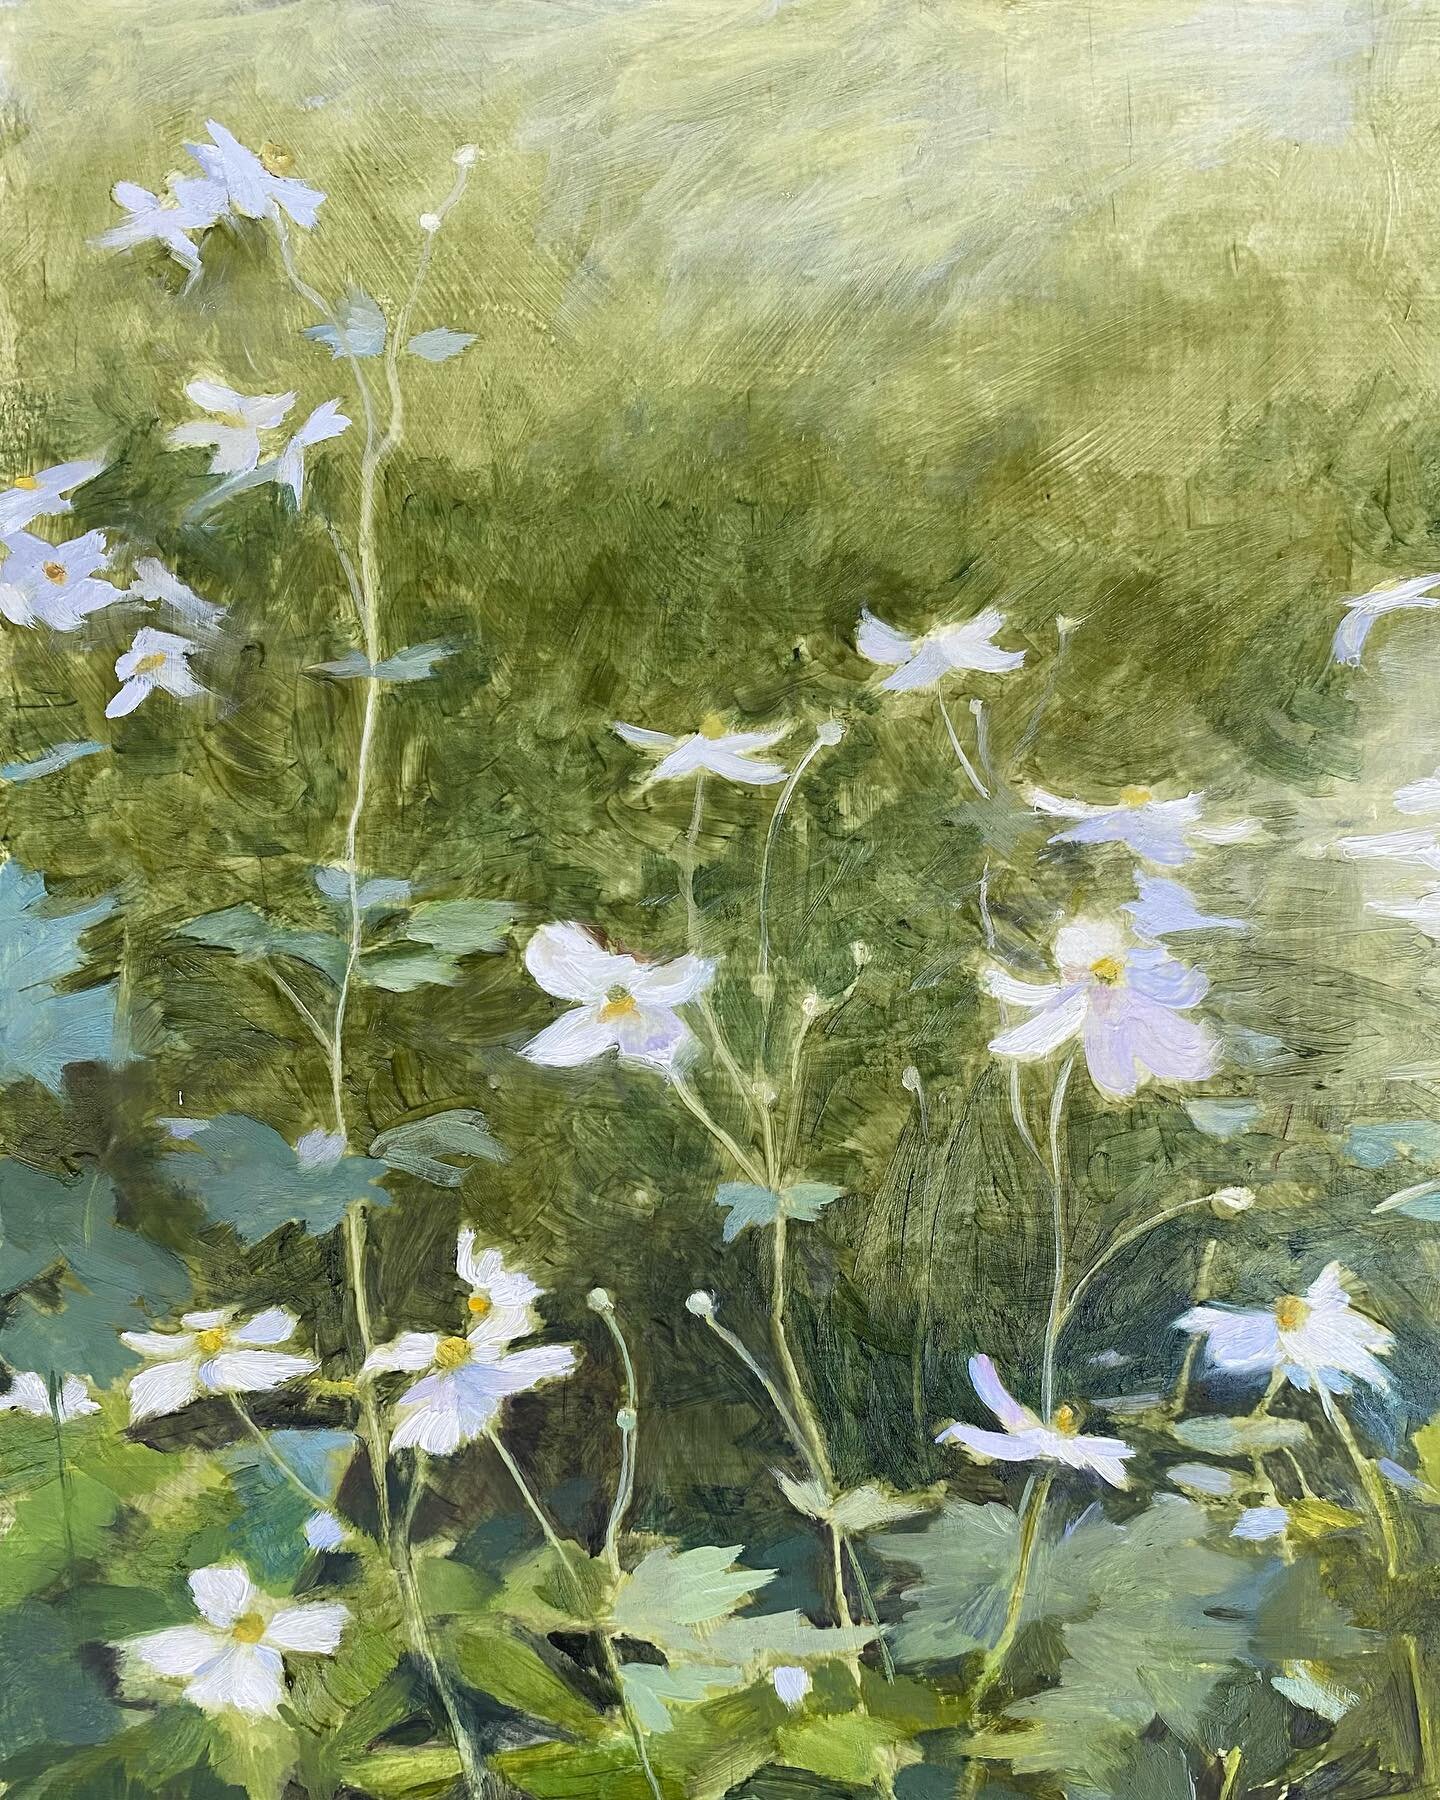 Green experiments. Not really sure exactly what I&rsquo;m doing, but somehow that makes more sense than knowing at the moment 🤔🤷🏻&zwj;♀️🌱
#windflowers #oilpainting #paintingnature #paintinglight #viriditas #terreverte #japaneseanemones #autumngar